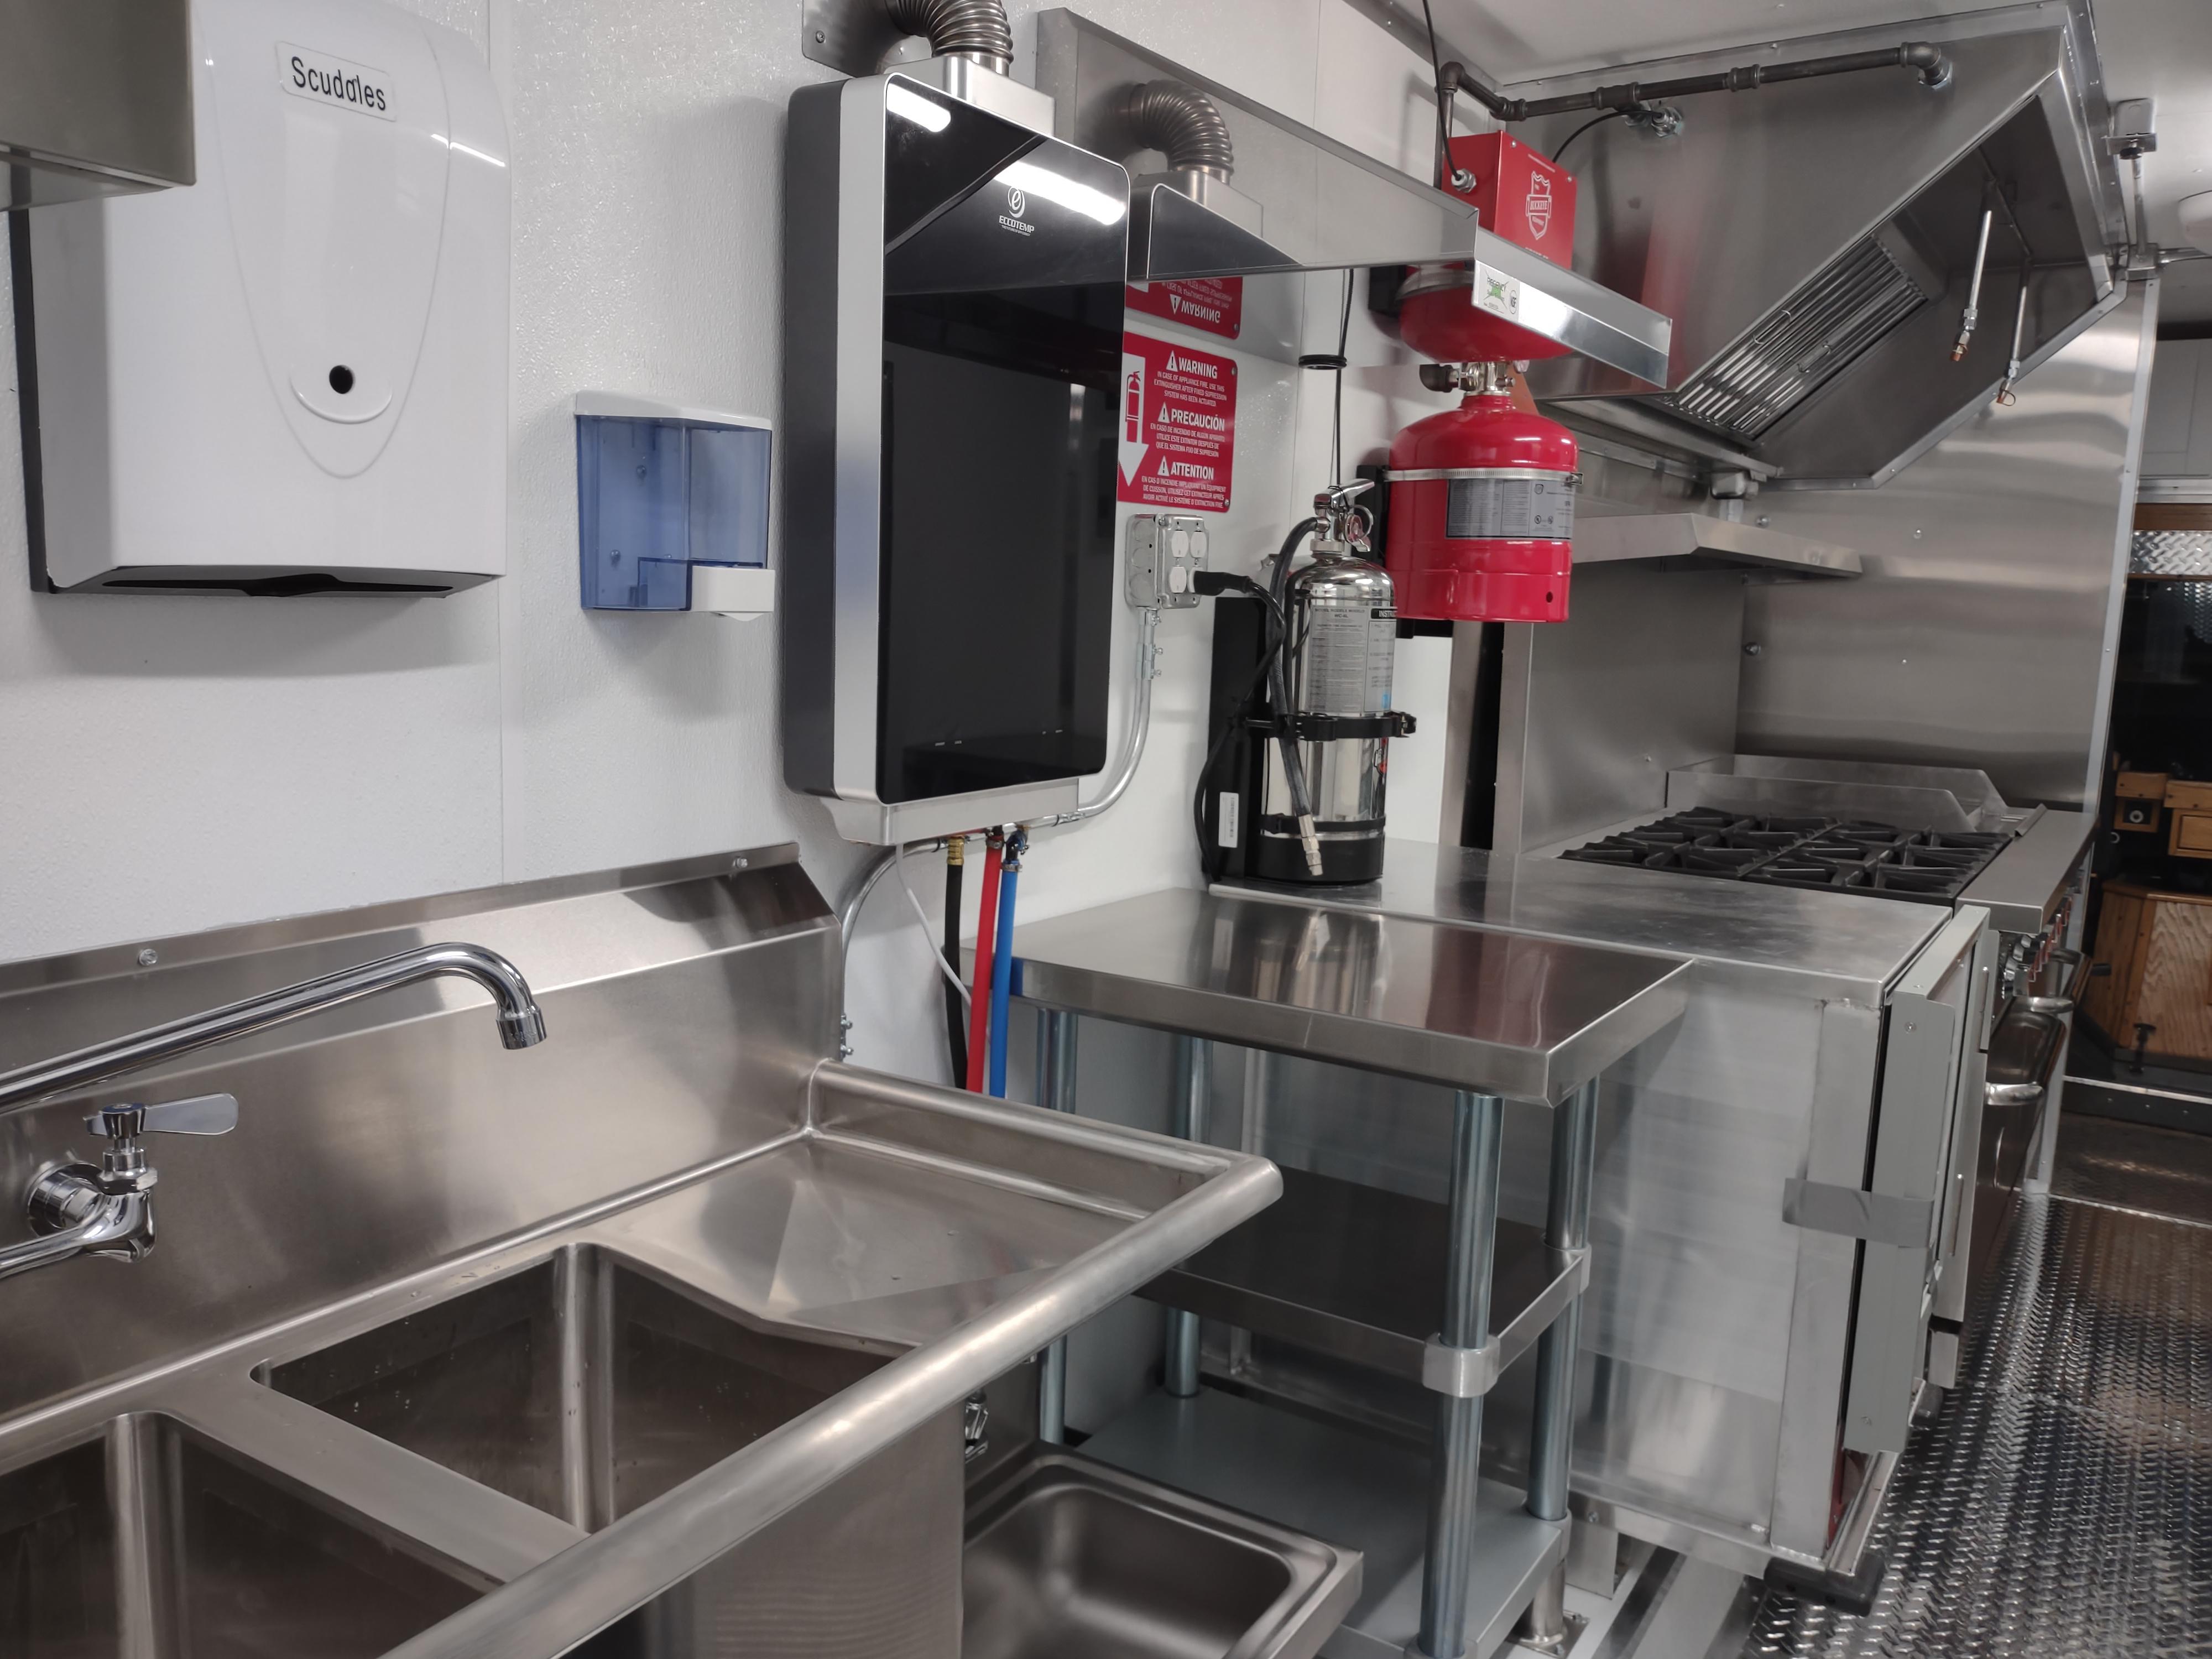 Discover the Best Food Truck Builders at Mobile Kitchen Fabrication in Denver, CO. Our experienced team brings together creativity and engineering excellence to construct food trucks that stand out in terms of quality, aesthetics, and efficiency. We take pride in being the best in the business.